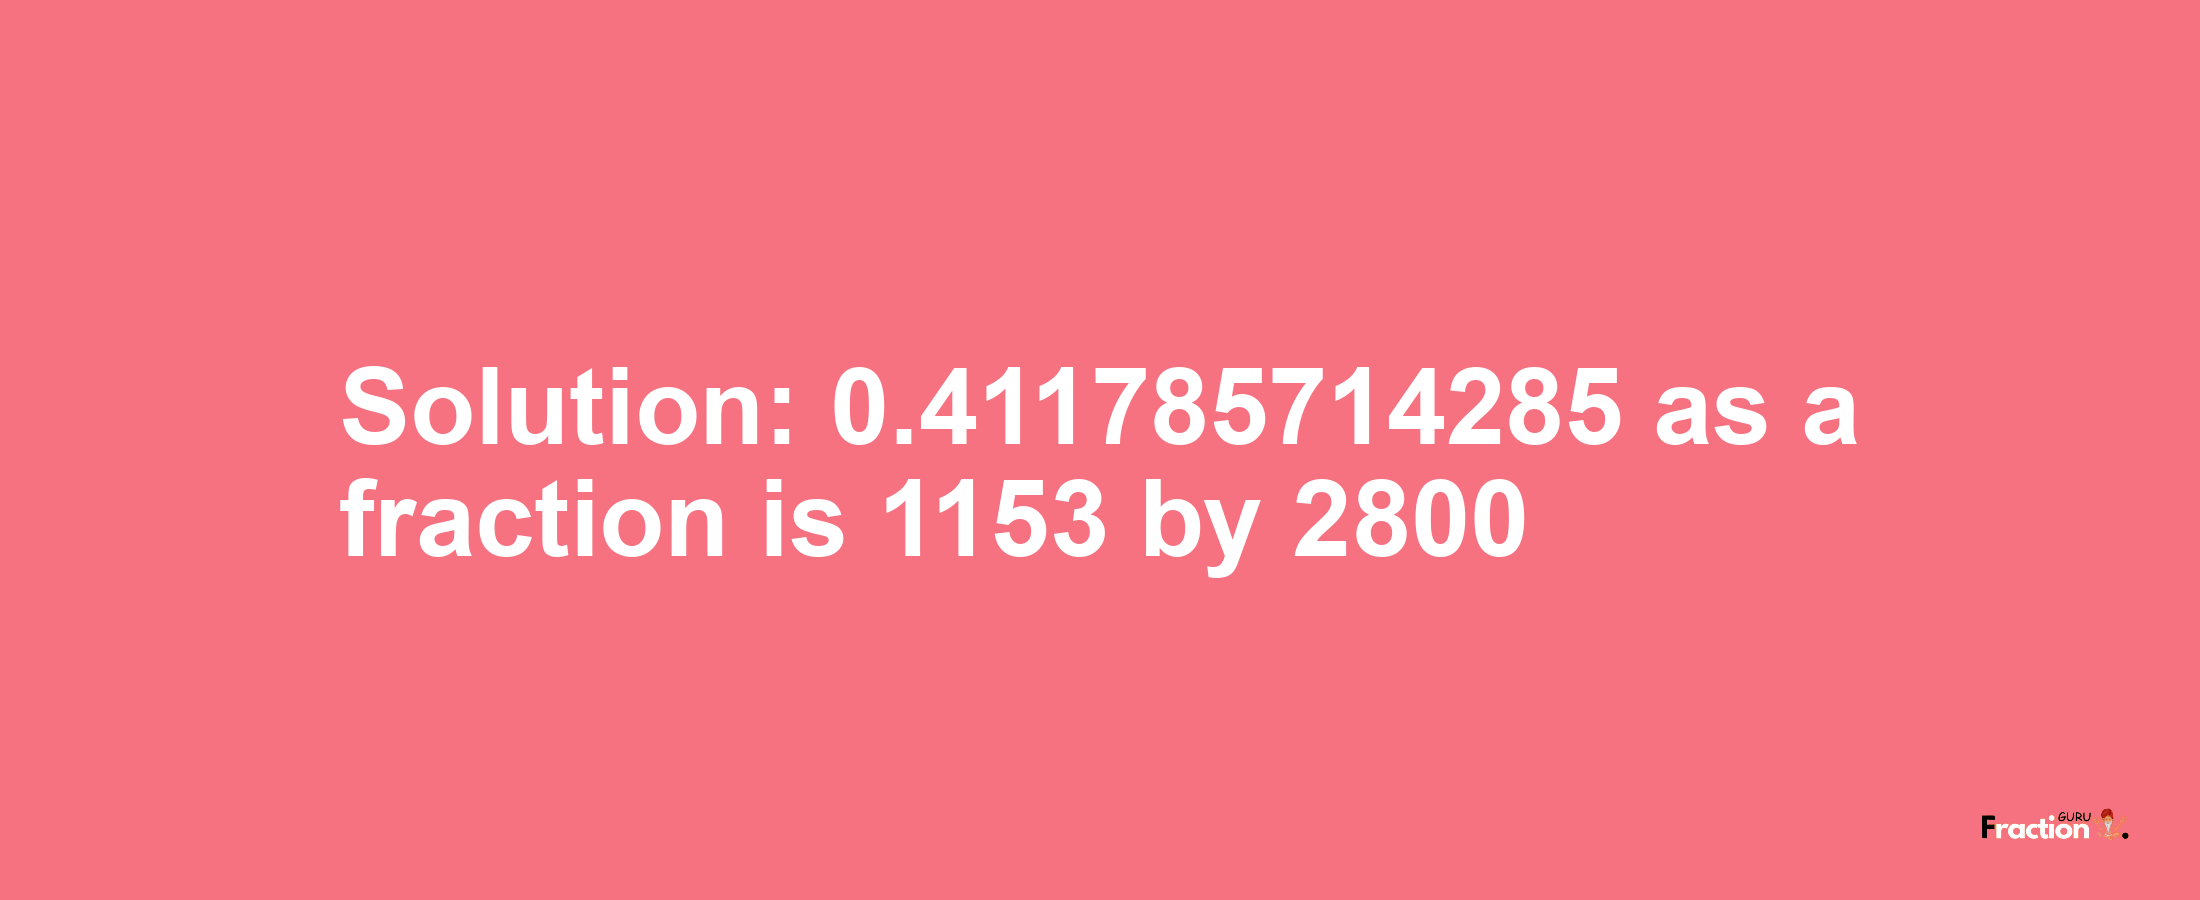 Solution:0.411785714285 as a fraction is 1153/2800